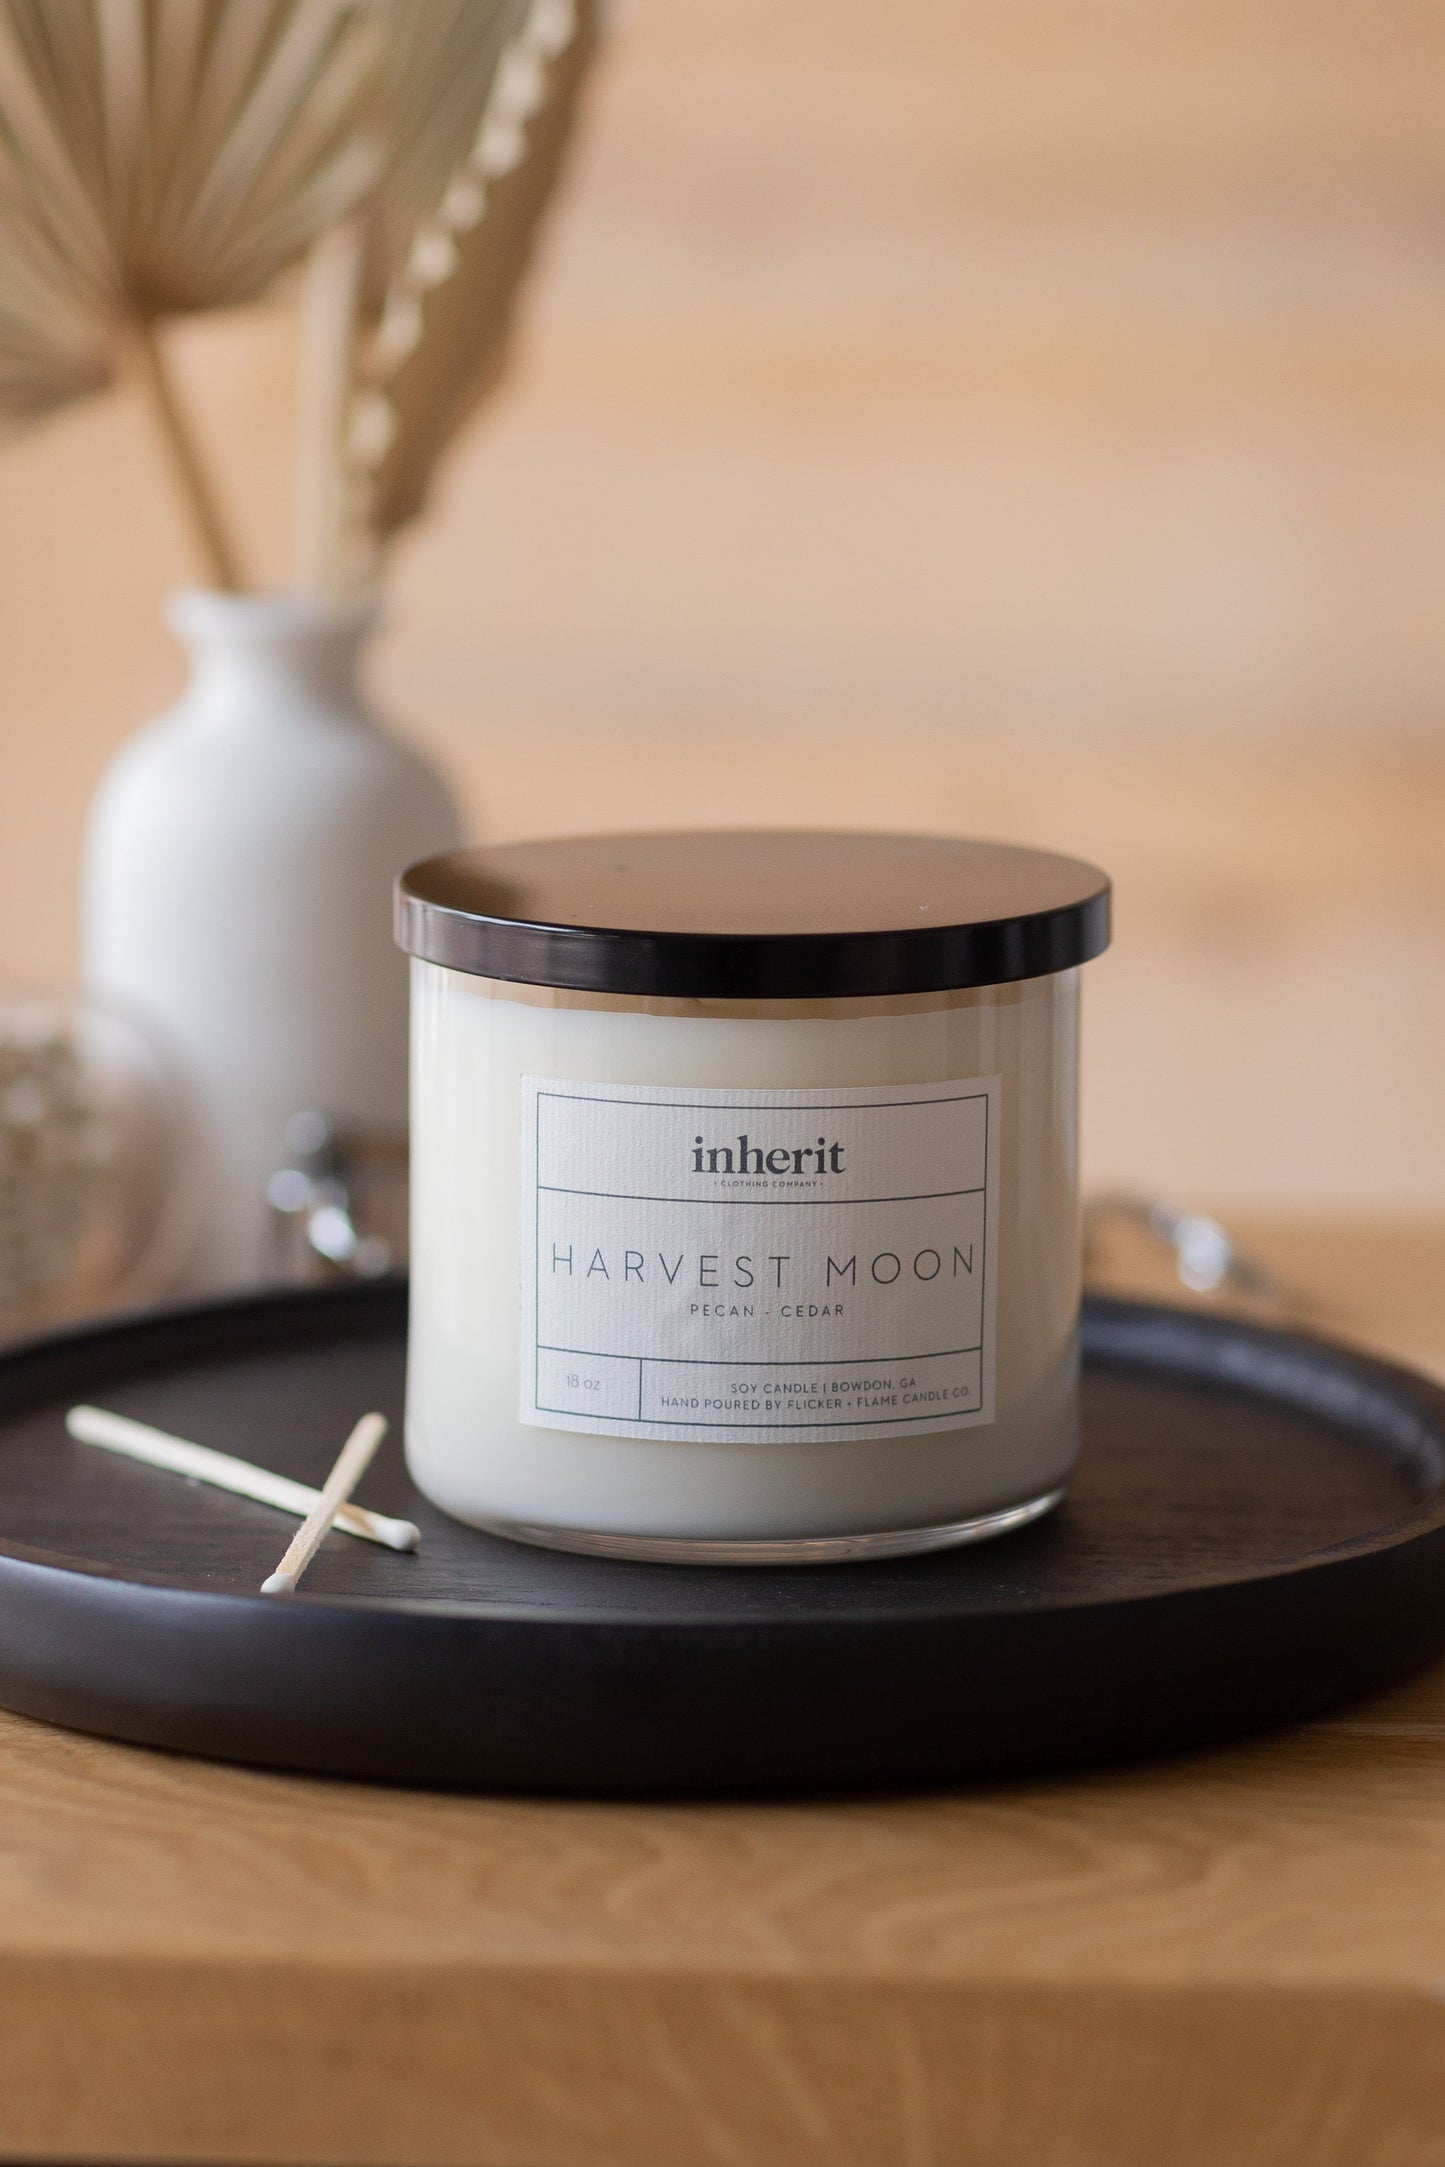 Inherit Fall Scented Soy Candle 18 oz. Gifts Harvest Moon